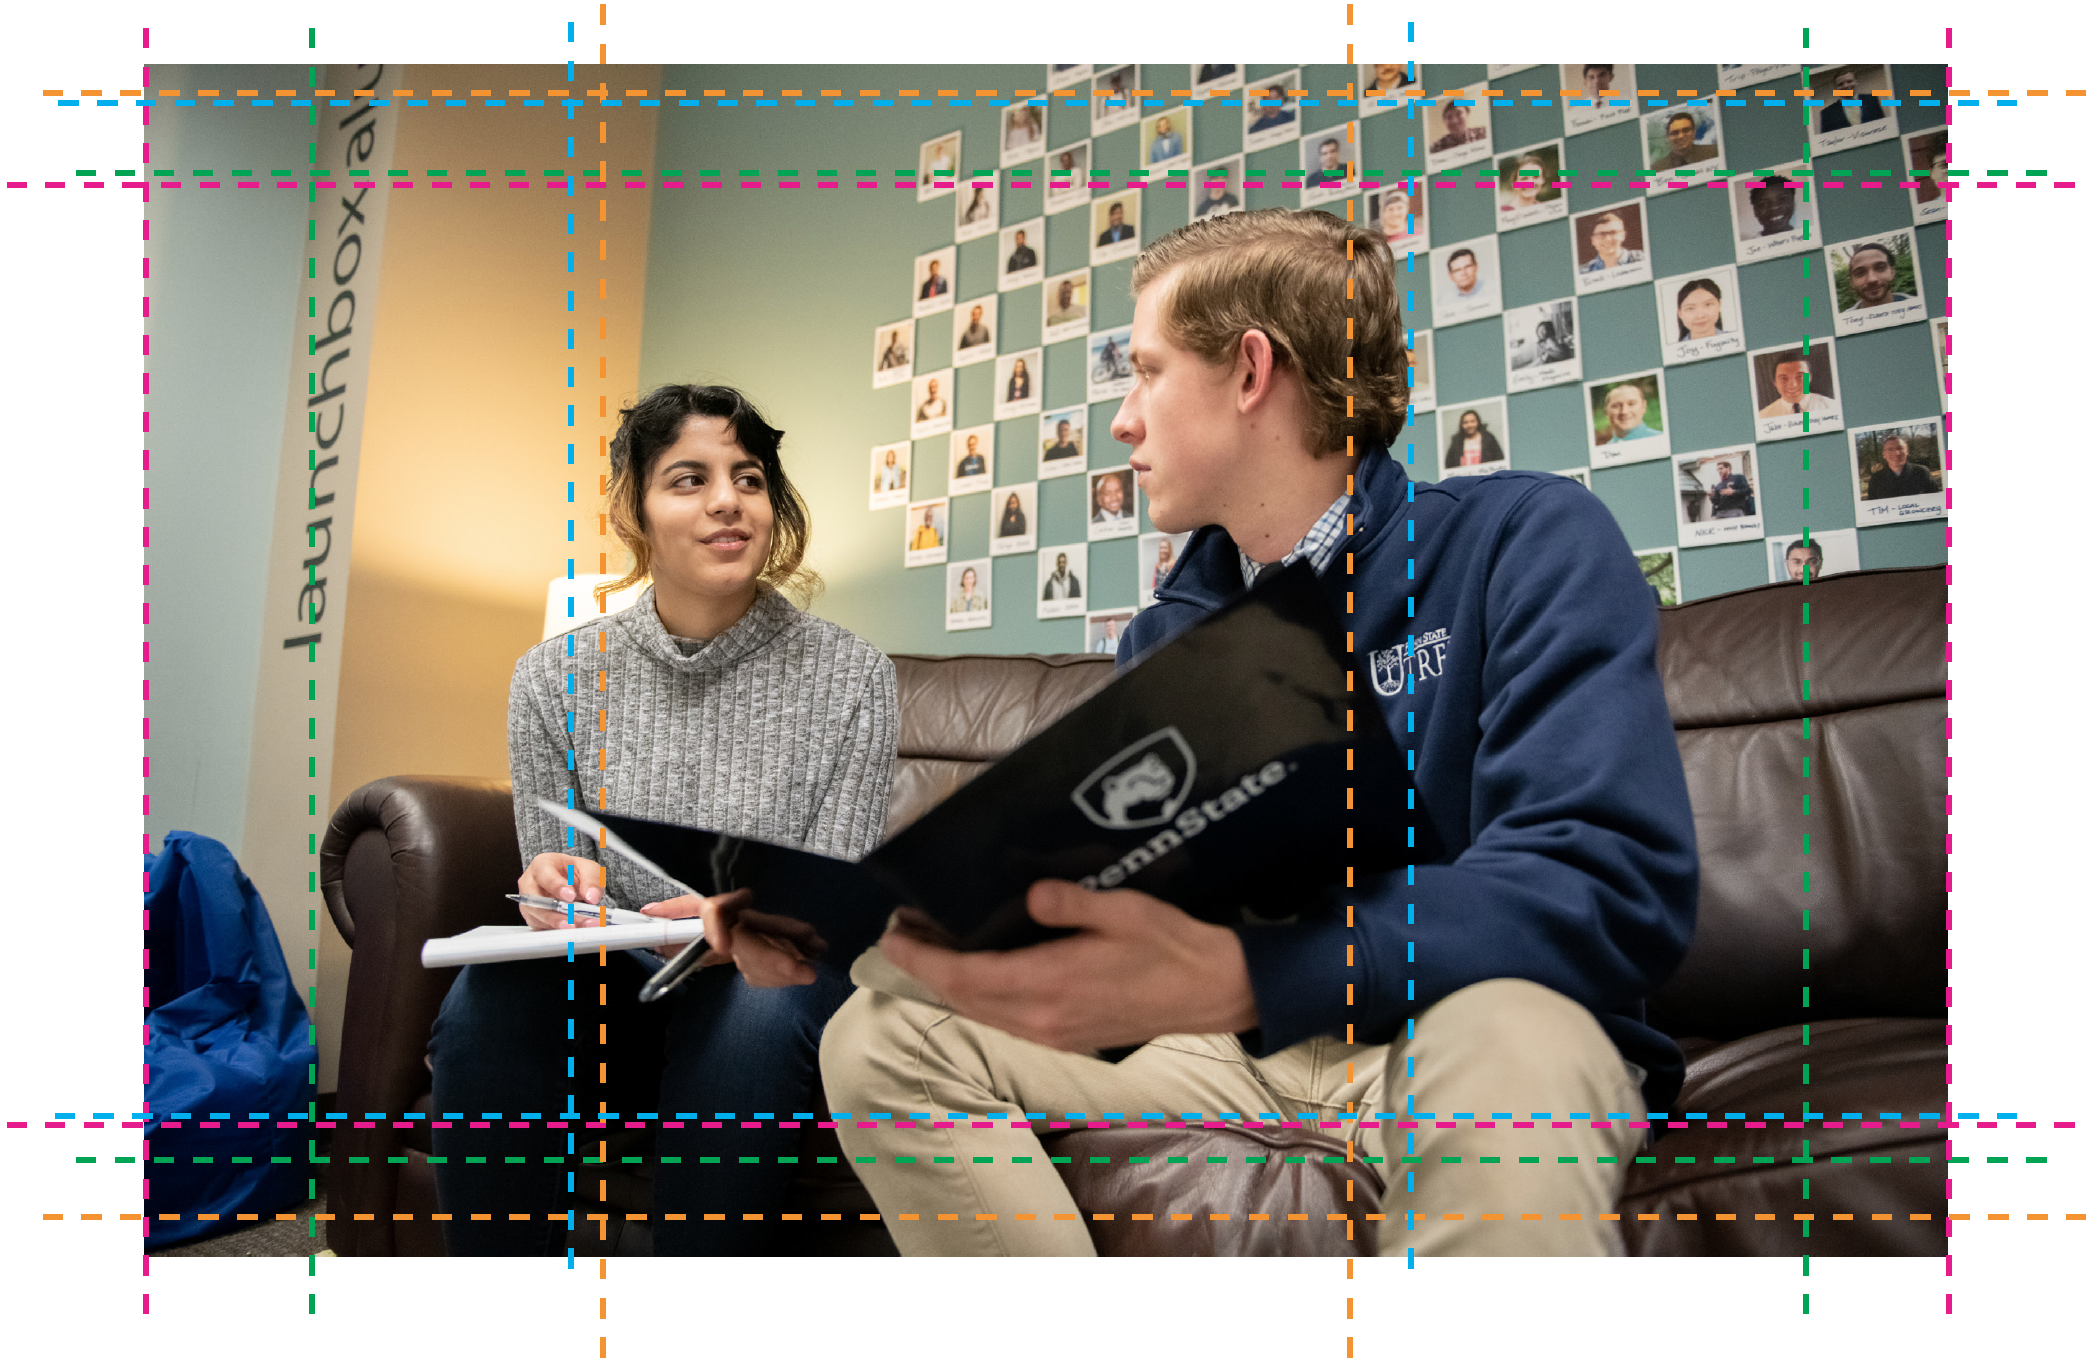 Interns in conversation, with image card crop marks. 